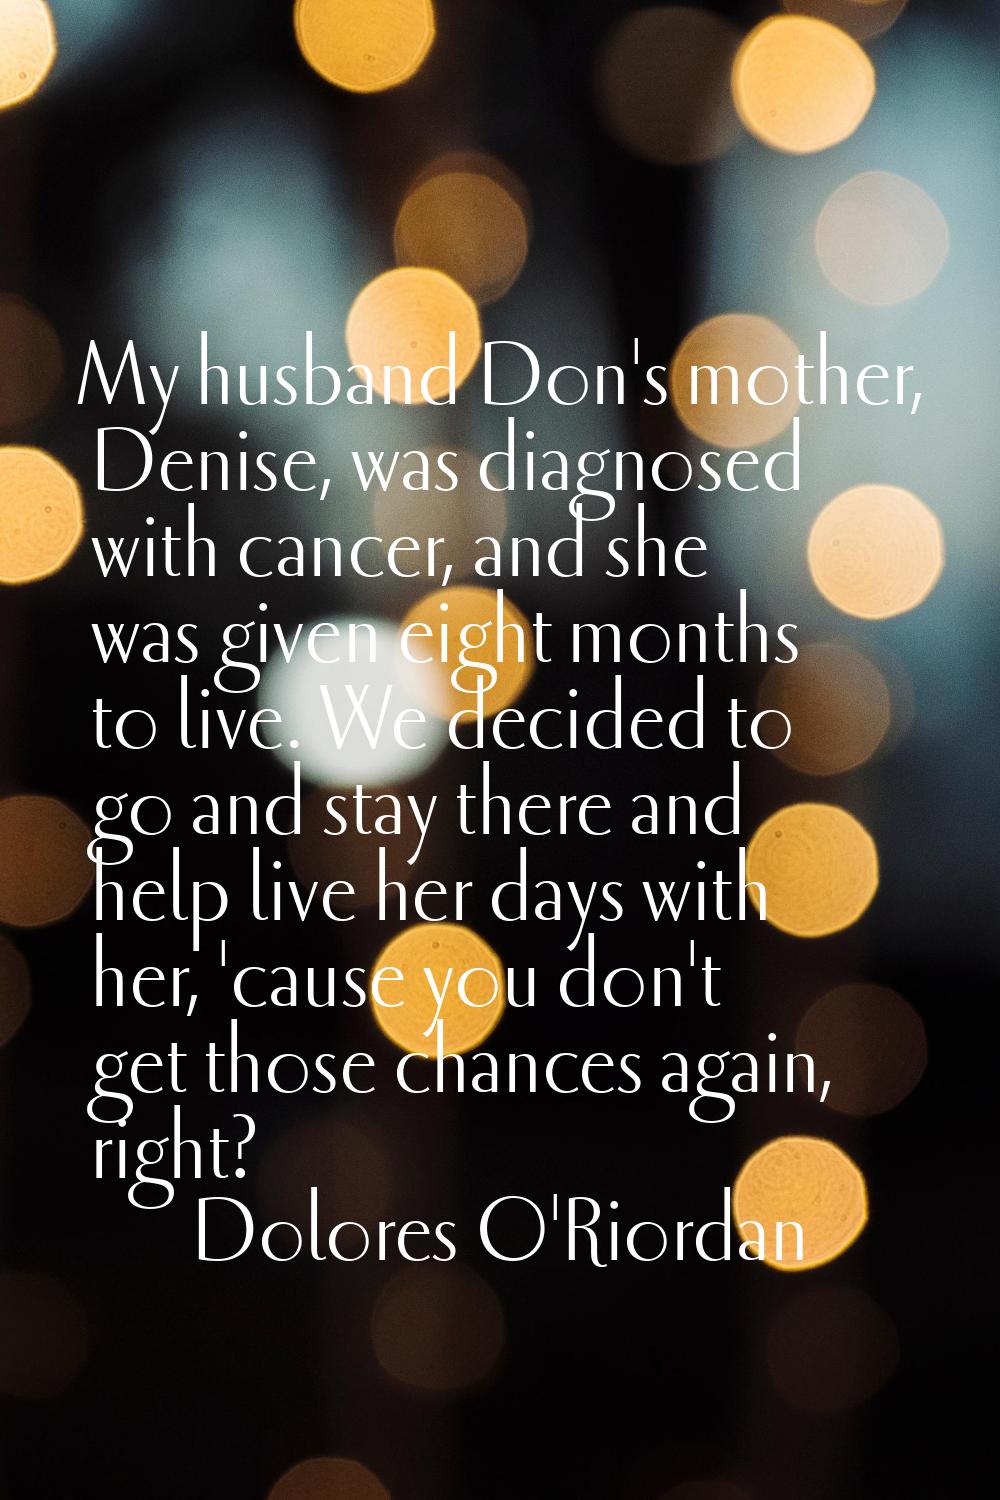 My husband Don's mother, Denise, was diagnosed with cancer, and she was given eight months to live.